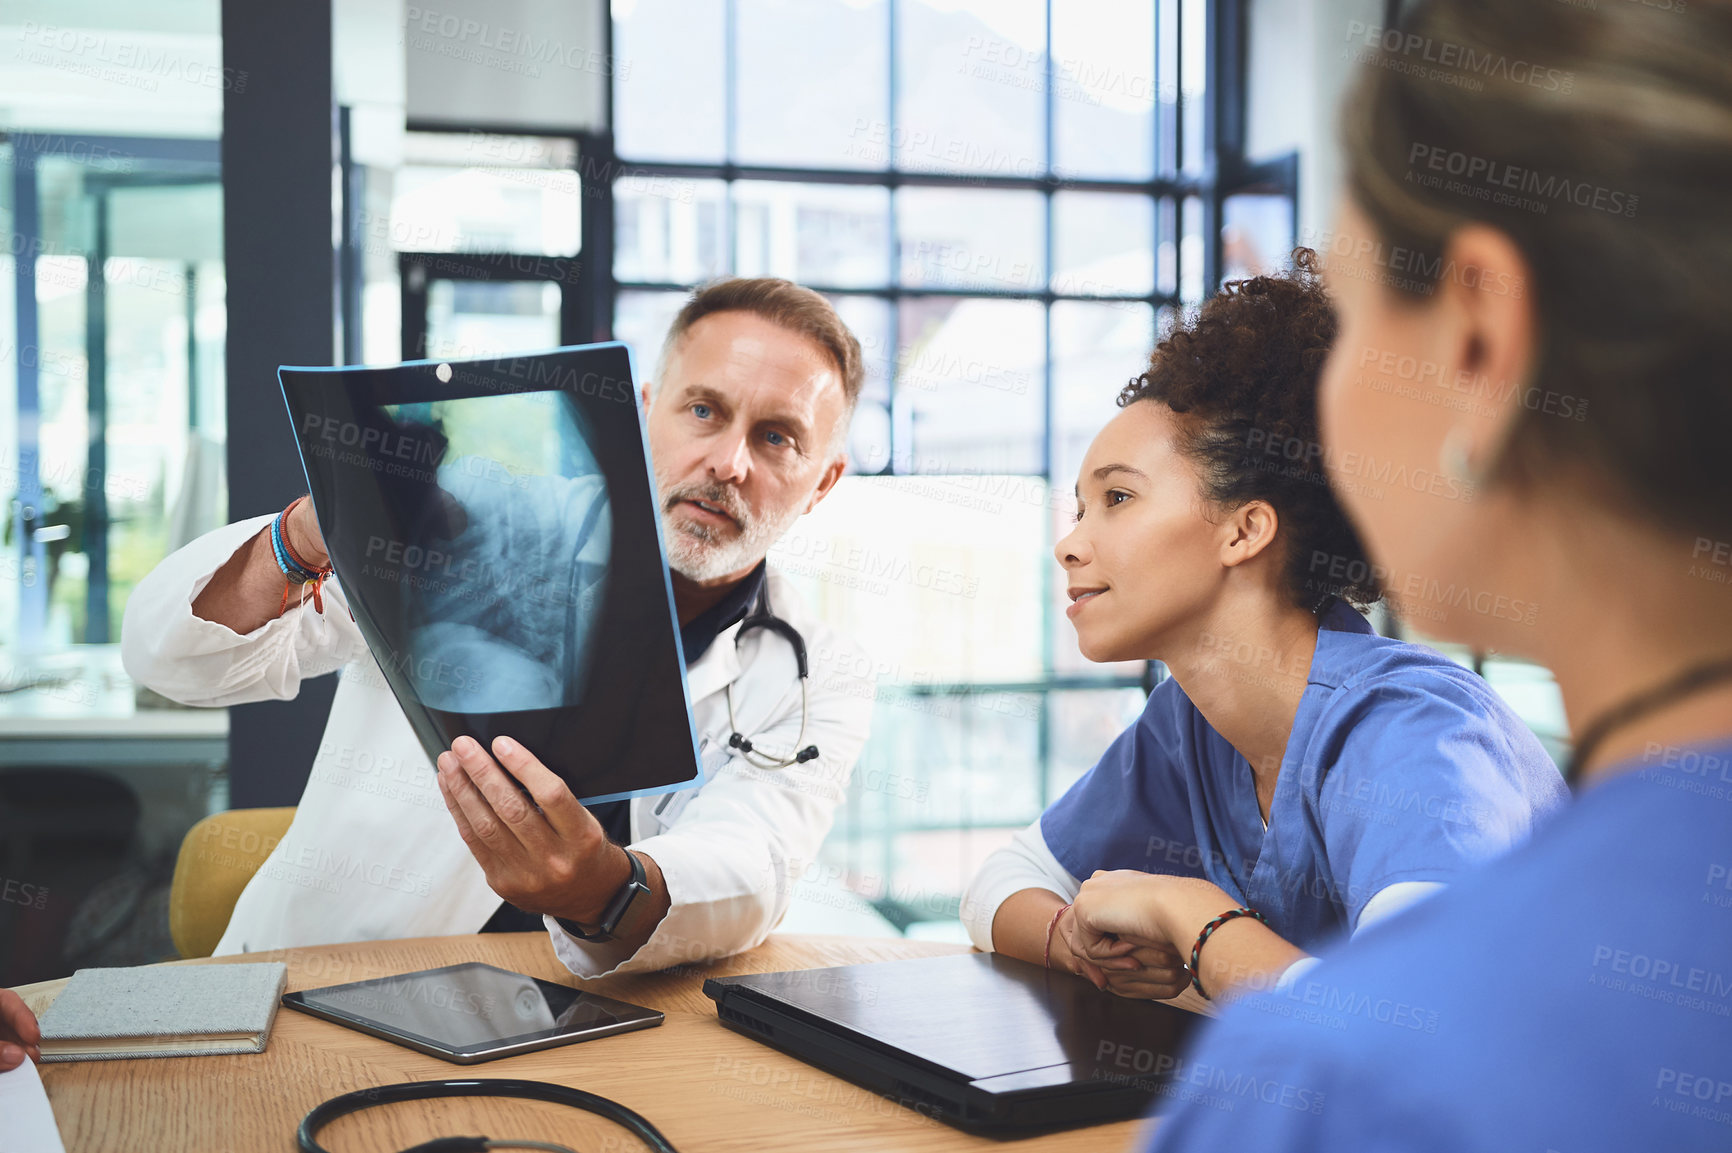 Buy stock photo Shot of a team of doctors analysing x-rays during a meeting in a hospital